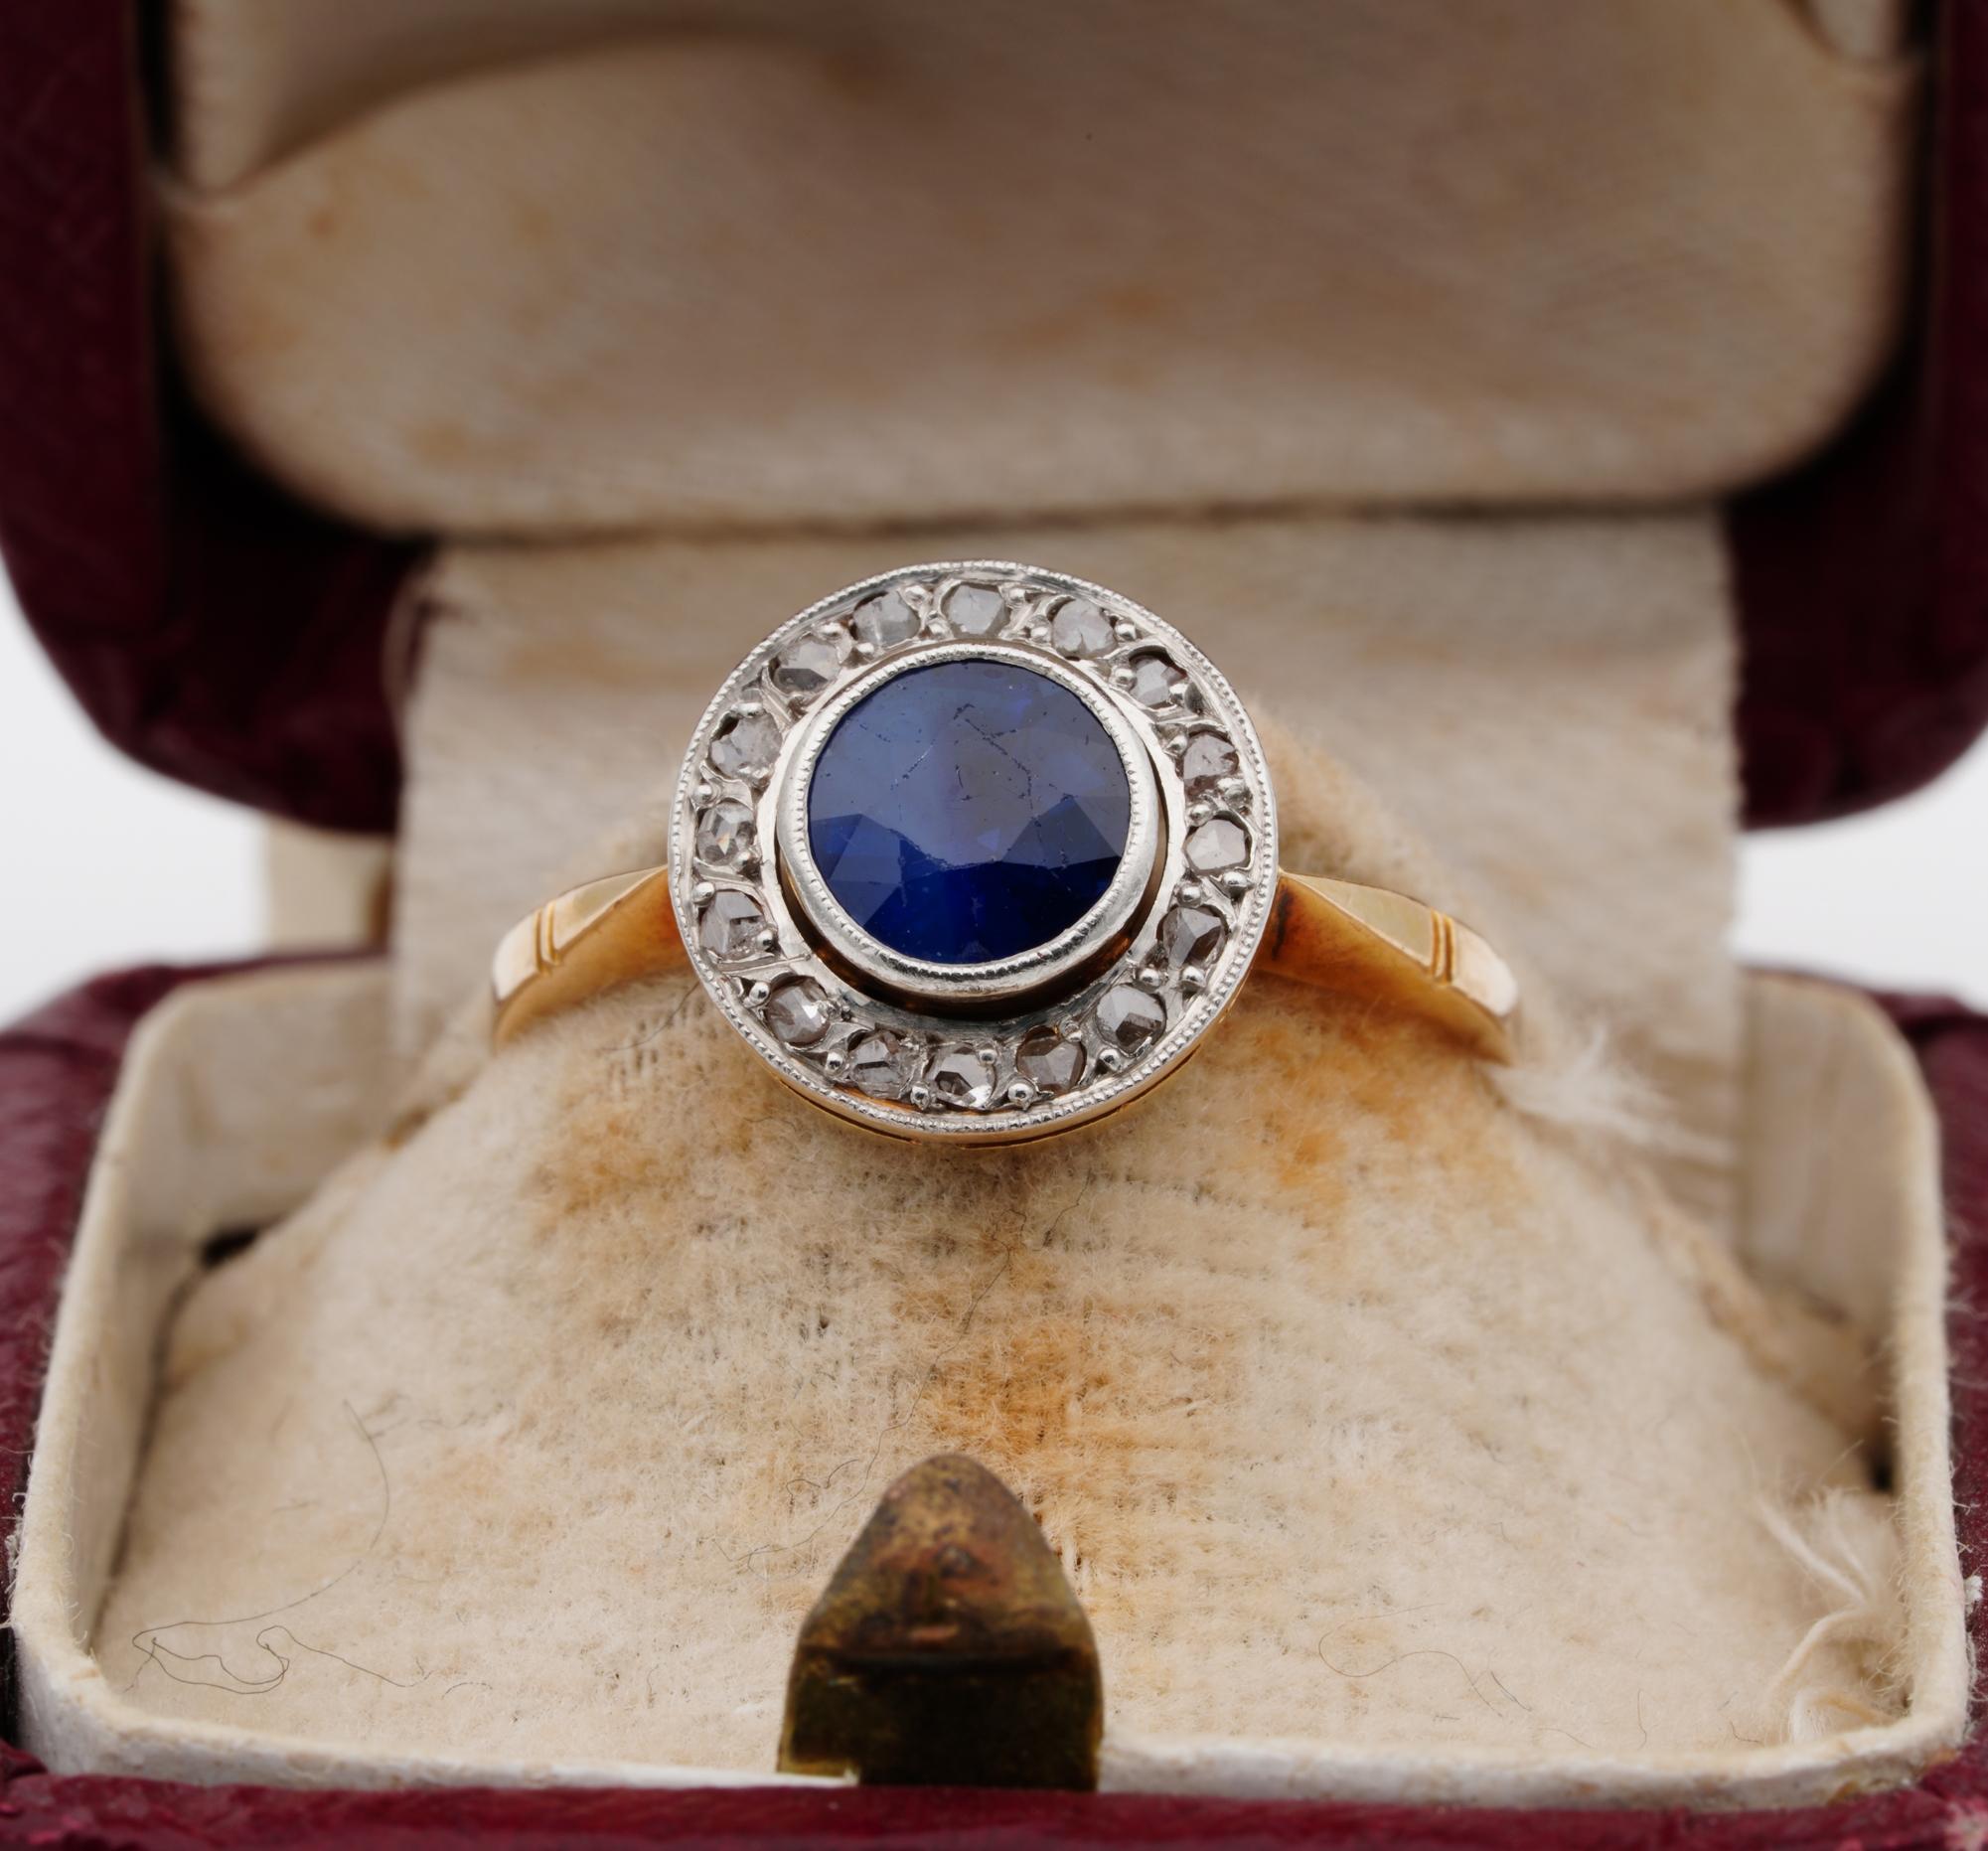 Lovely Target

This antique Victorian /Edwardian ring dates 1900 ca
Prettiest Target design most beloved during that time of solid 18 Kt gold with Silver top for the Diamonds
A true charmer of that period pointed by a Natural Blue – not treated